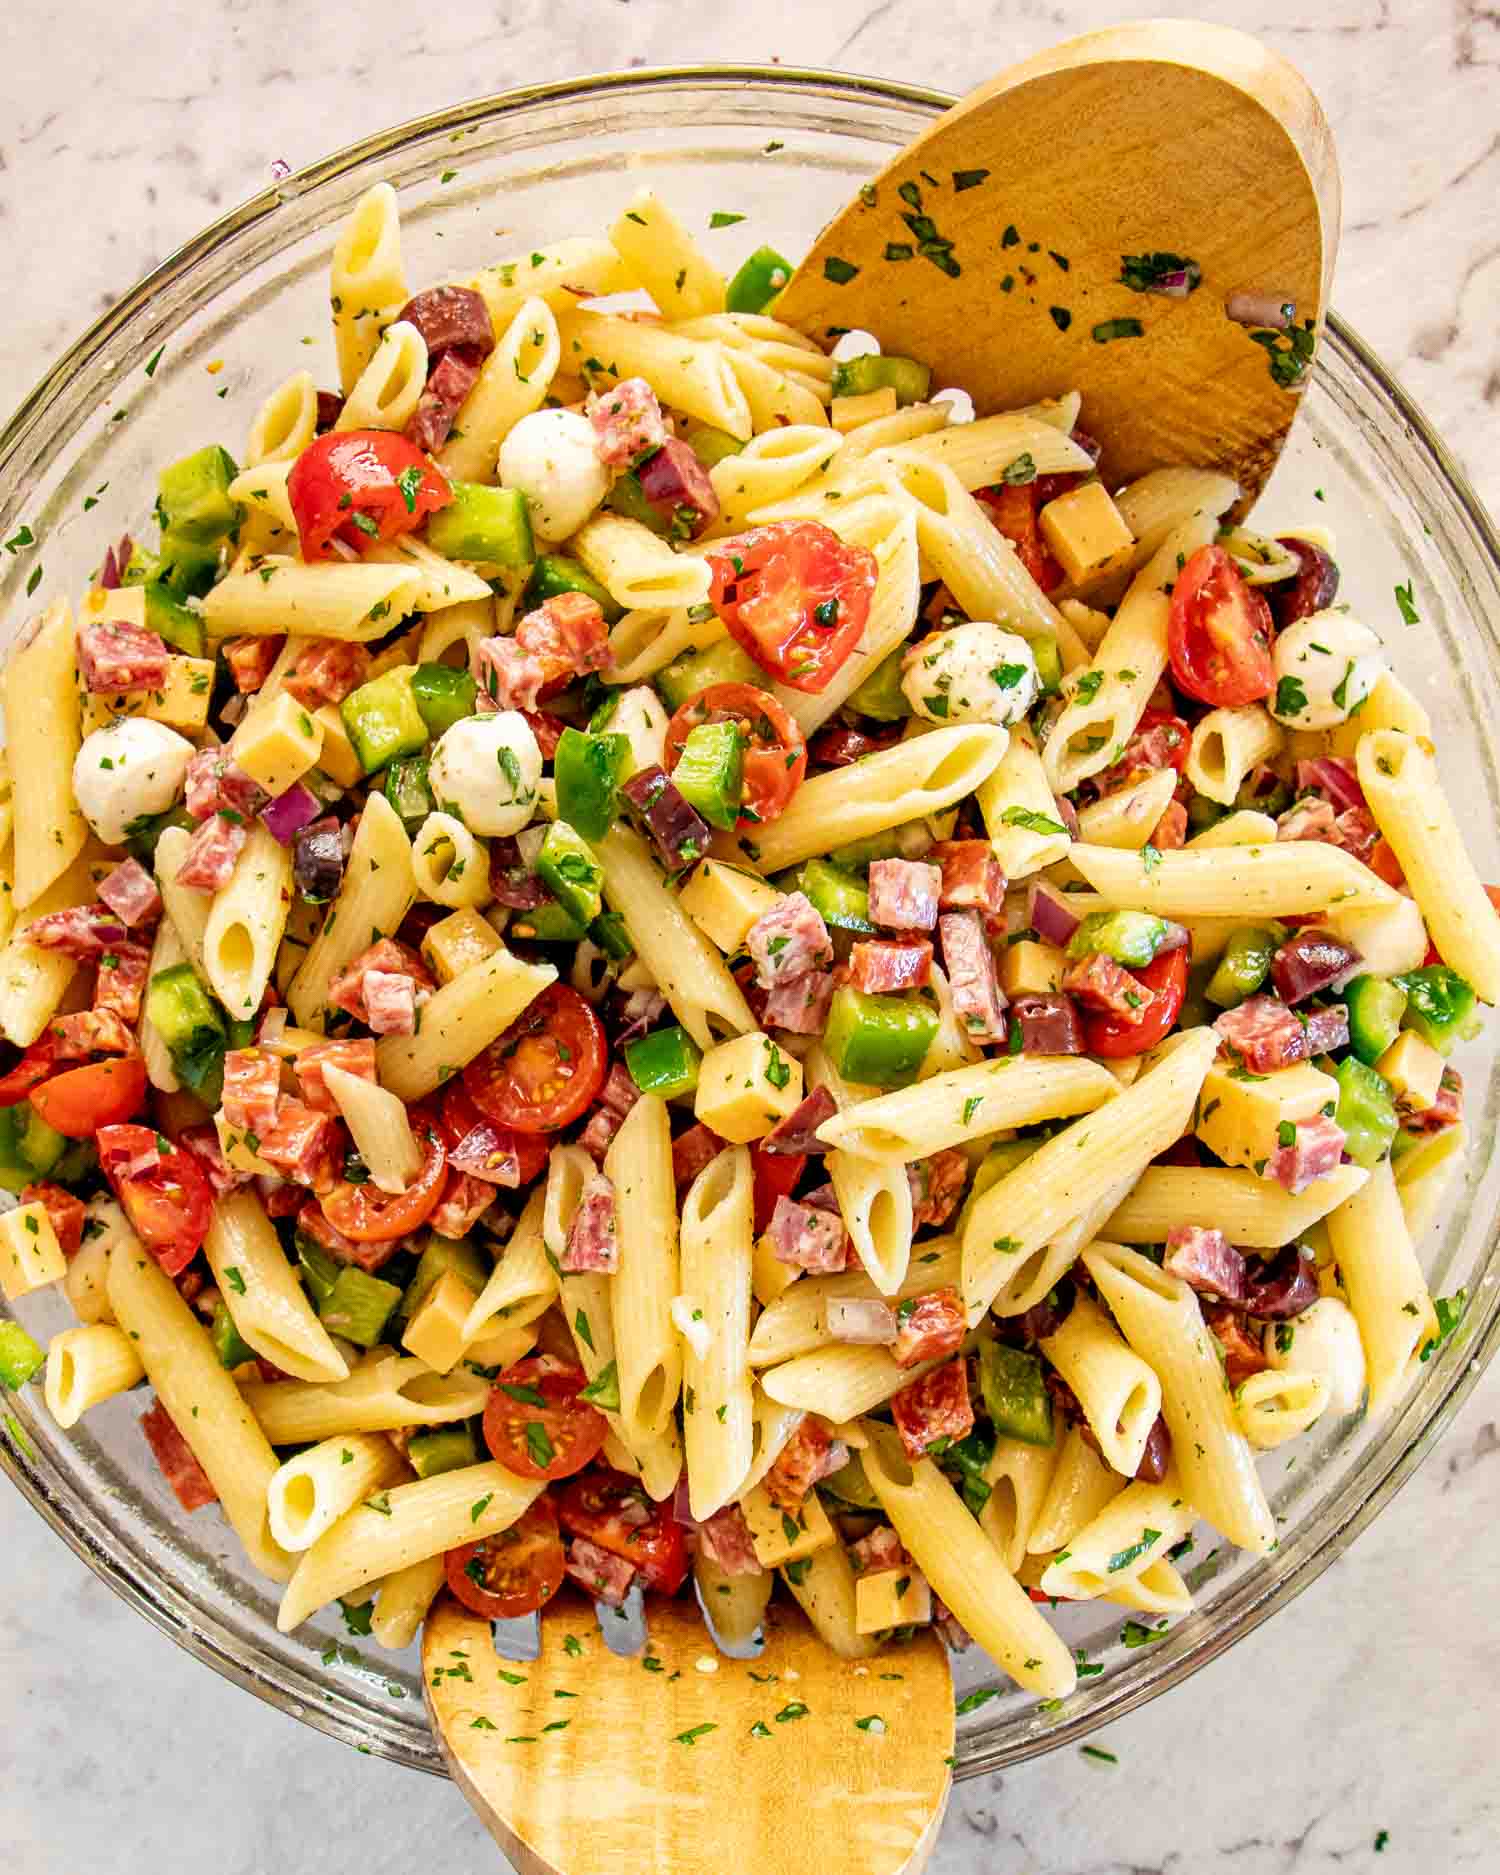 freshly made and tossed italian pasta salad in a bowl.